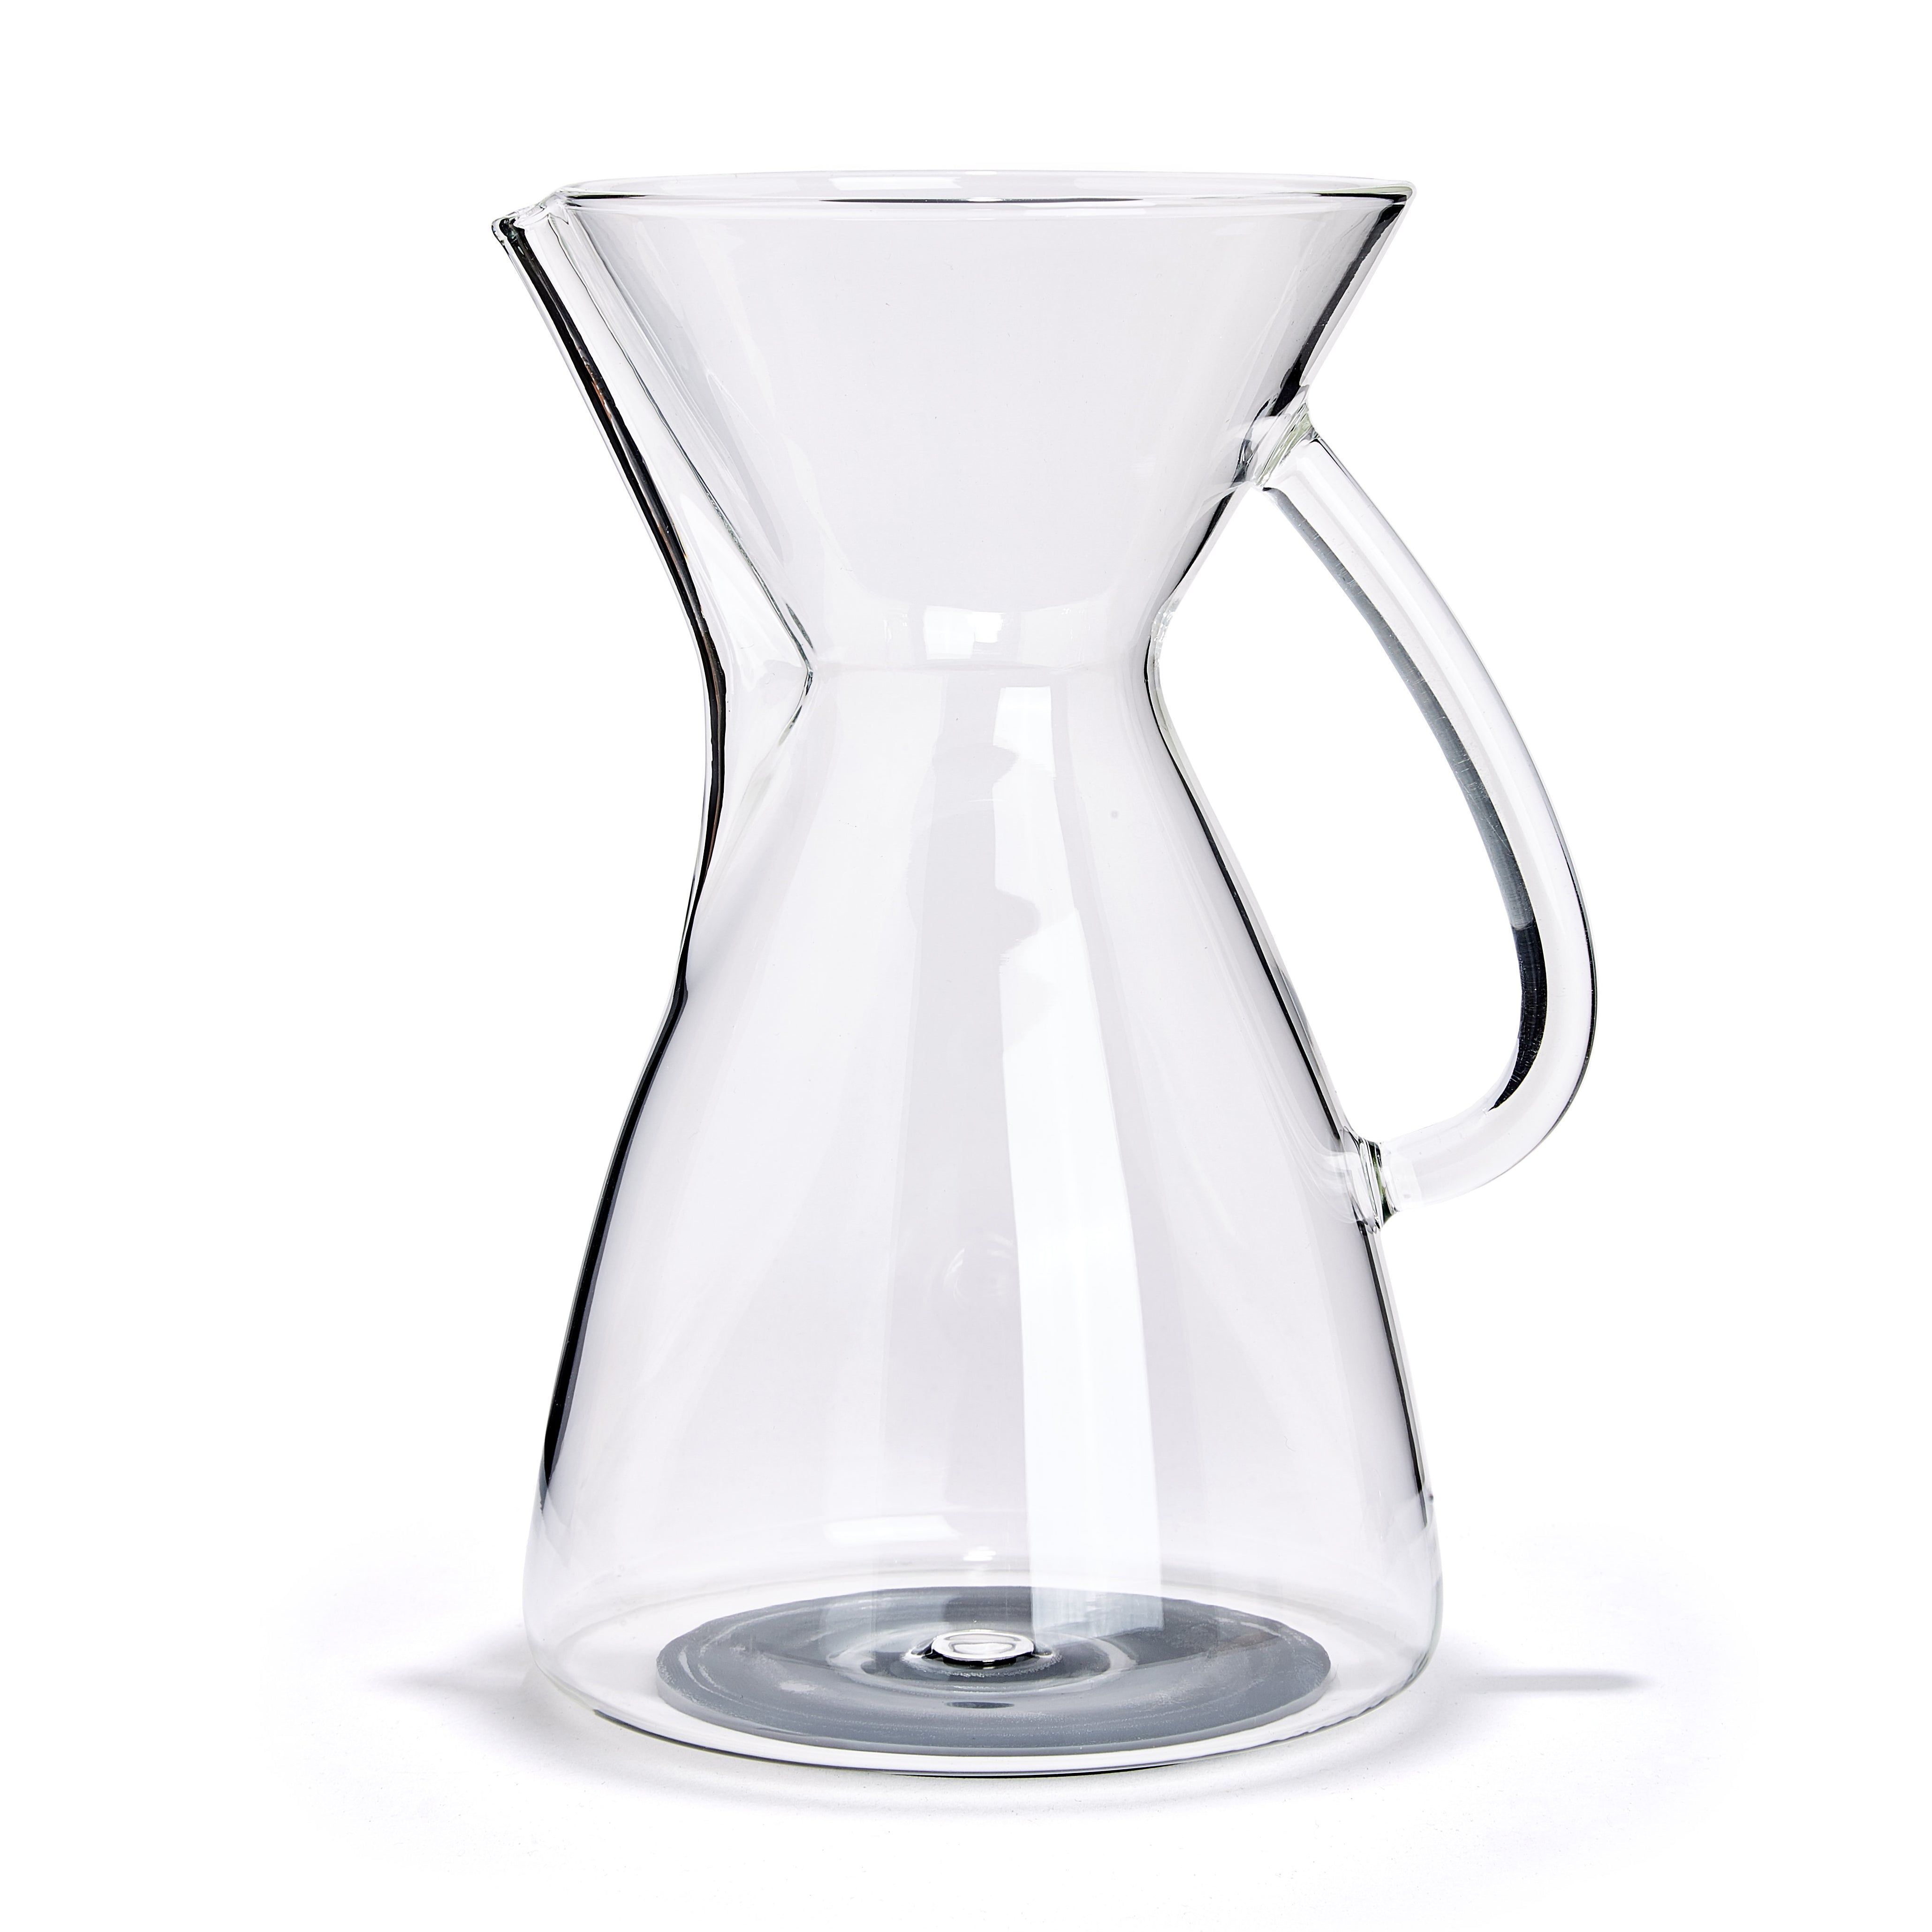 Ratio Six Replacement Thermal Carafe - White